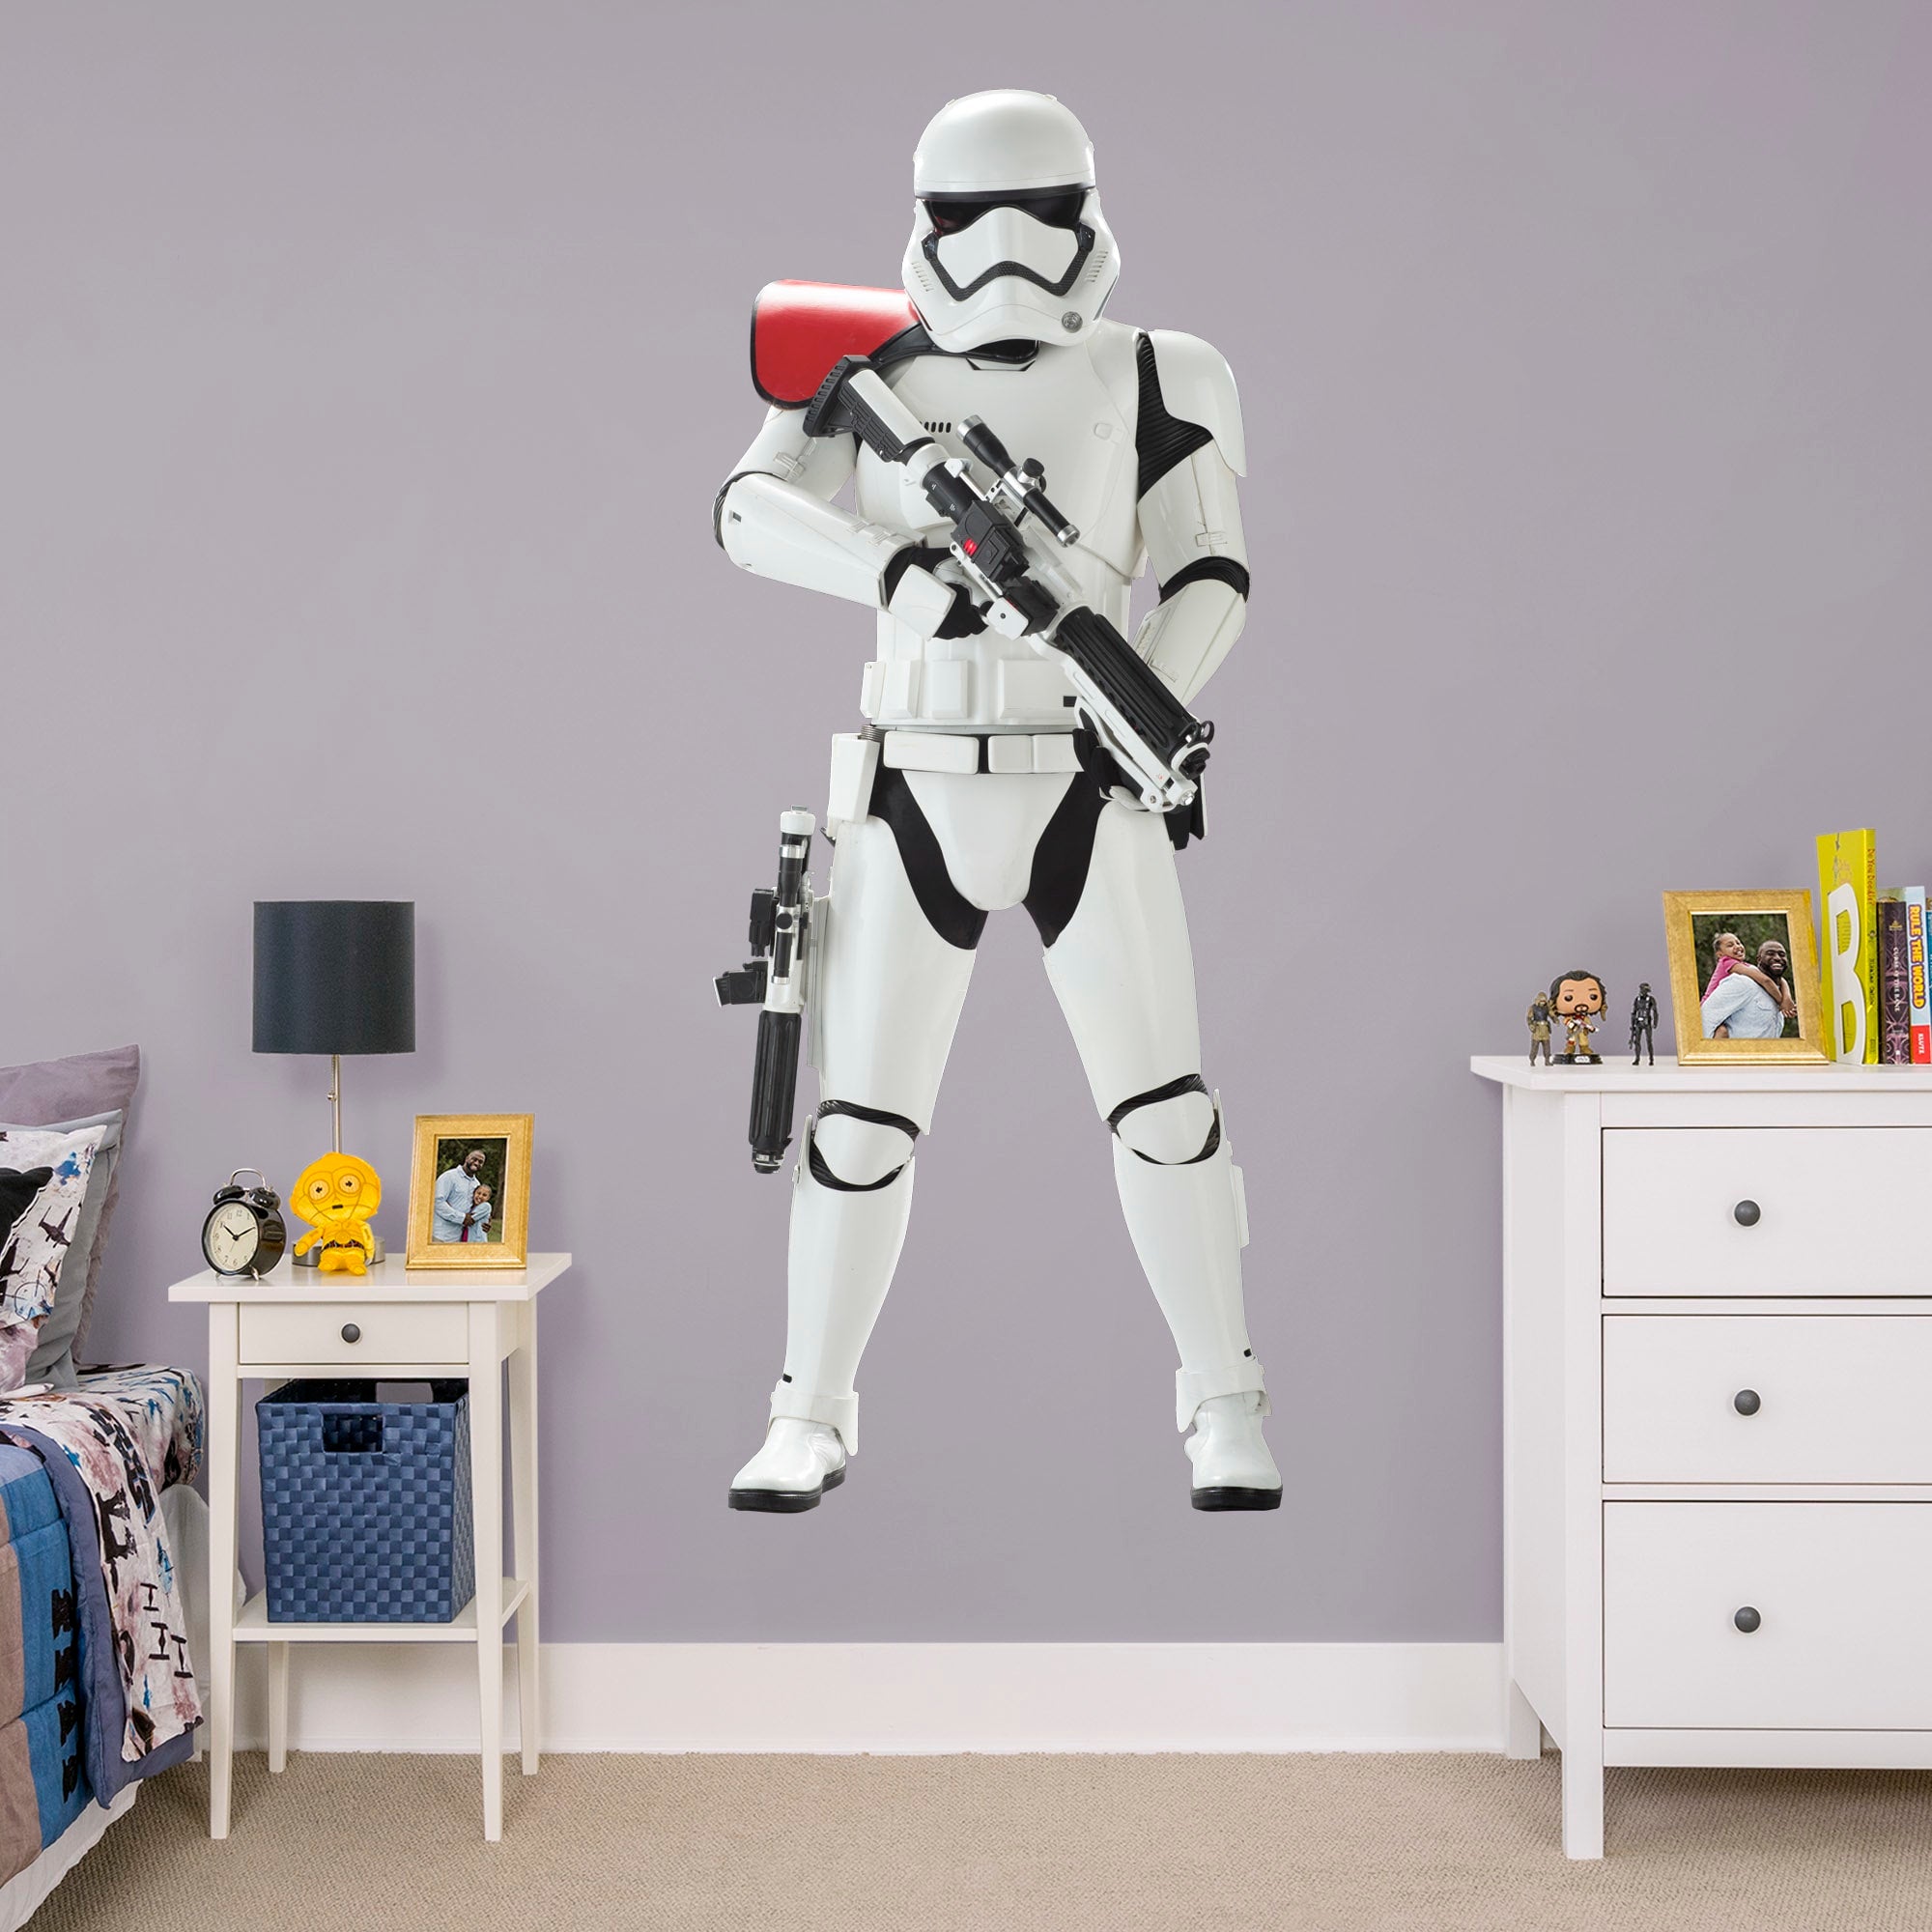 Stormtrooper - Star Wars: The Force Awakens - Officially Licensed Removable Wall Decal Life-Size Character + 2 Decals (31"W x 78